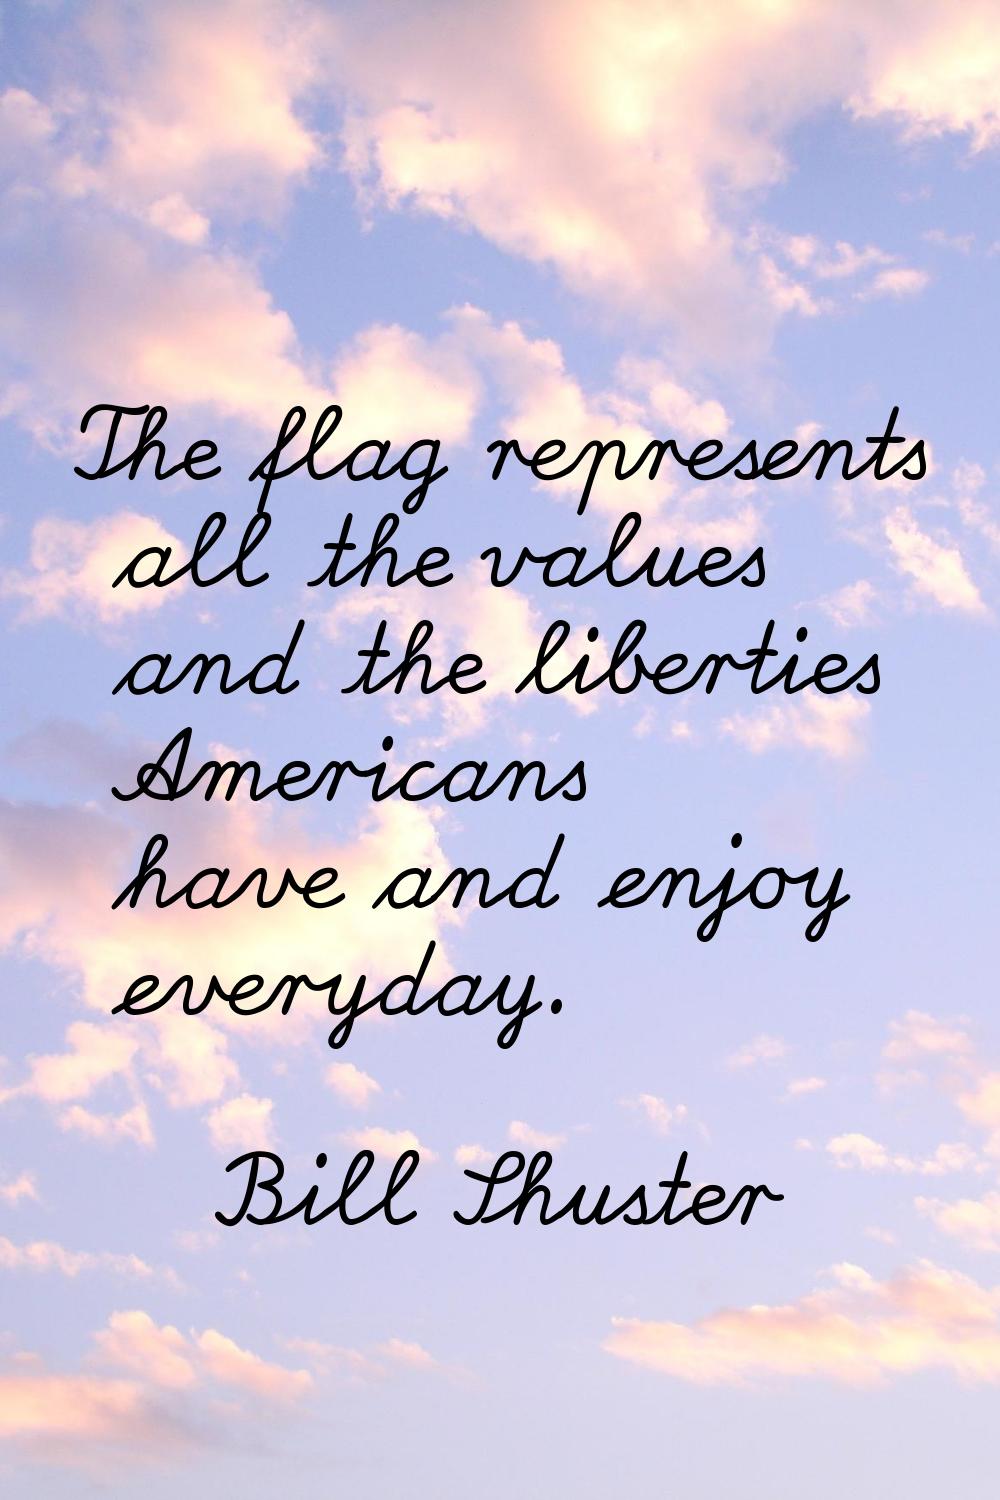 The flag represents all the values and the liberties Americans have and enjoy everyday.